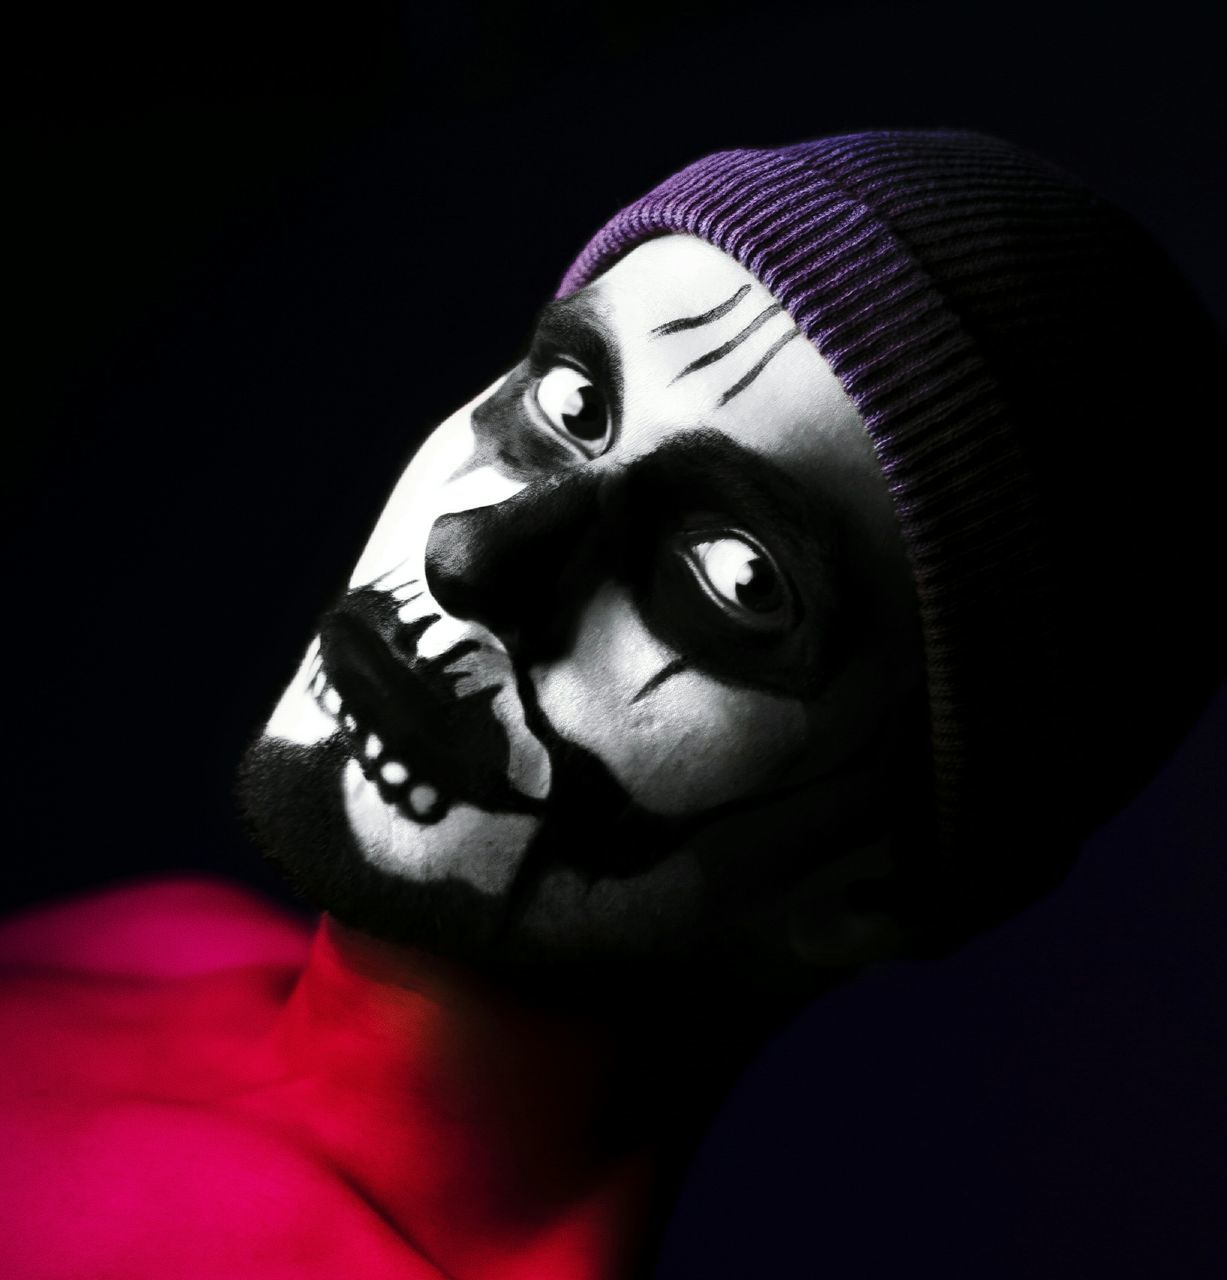 clown, black background, close-up, indoors, no people, day